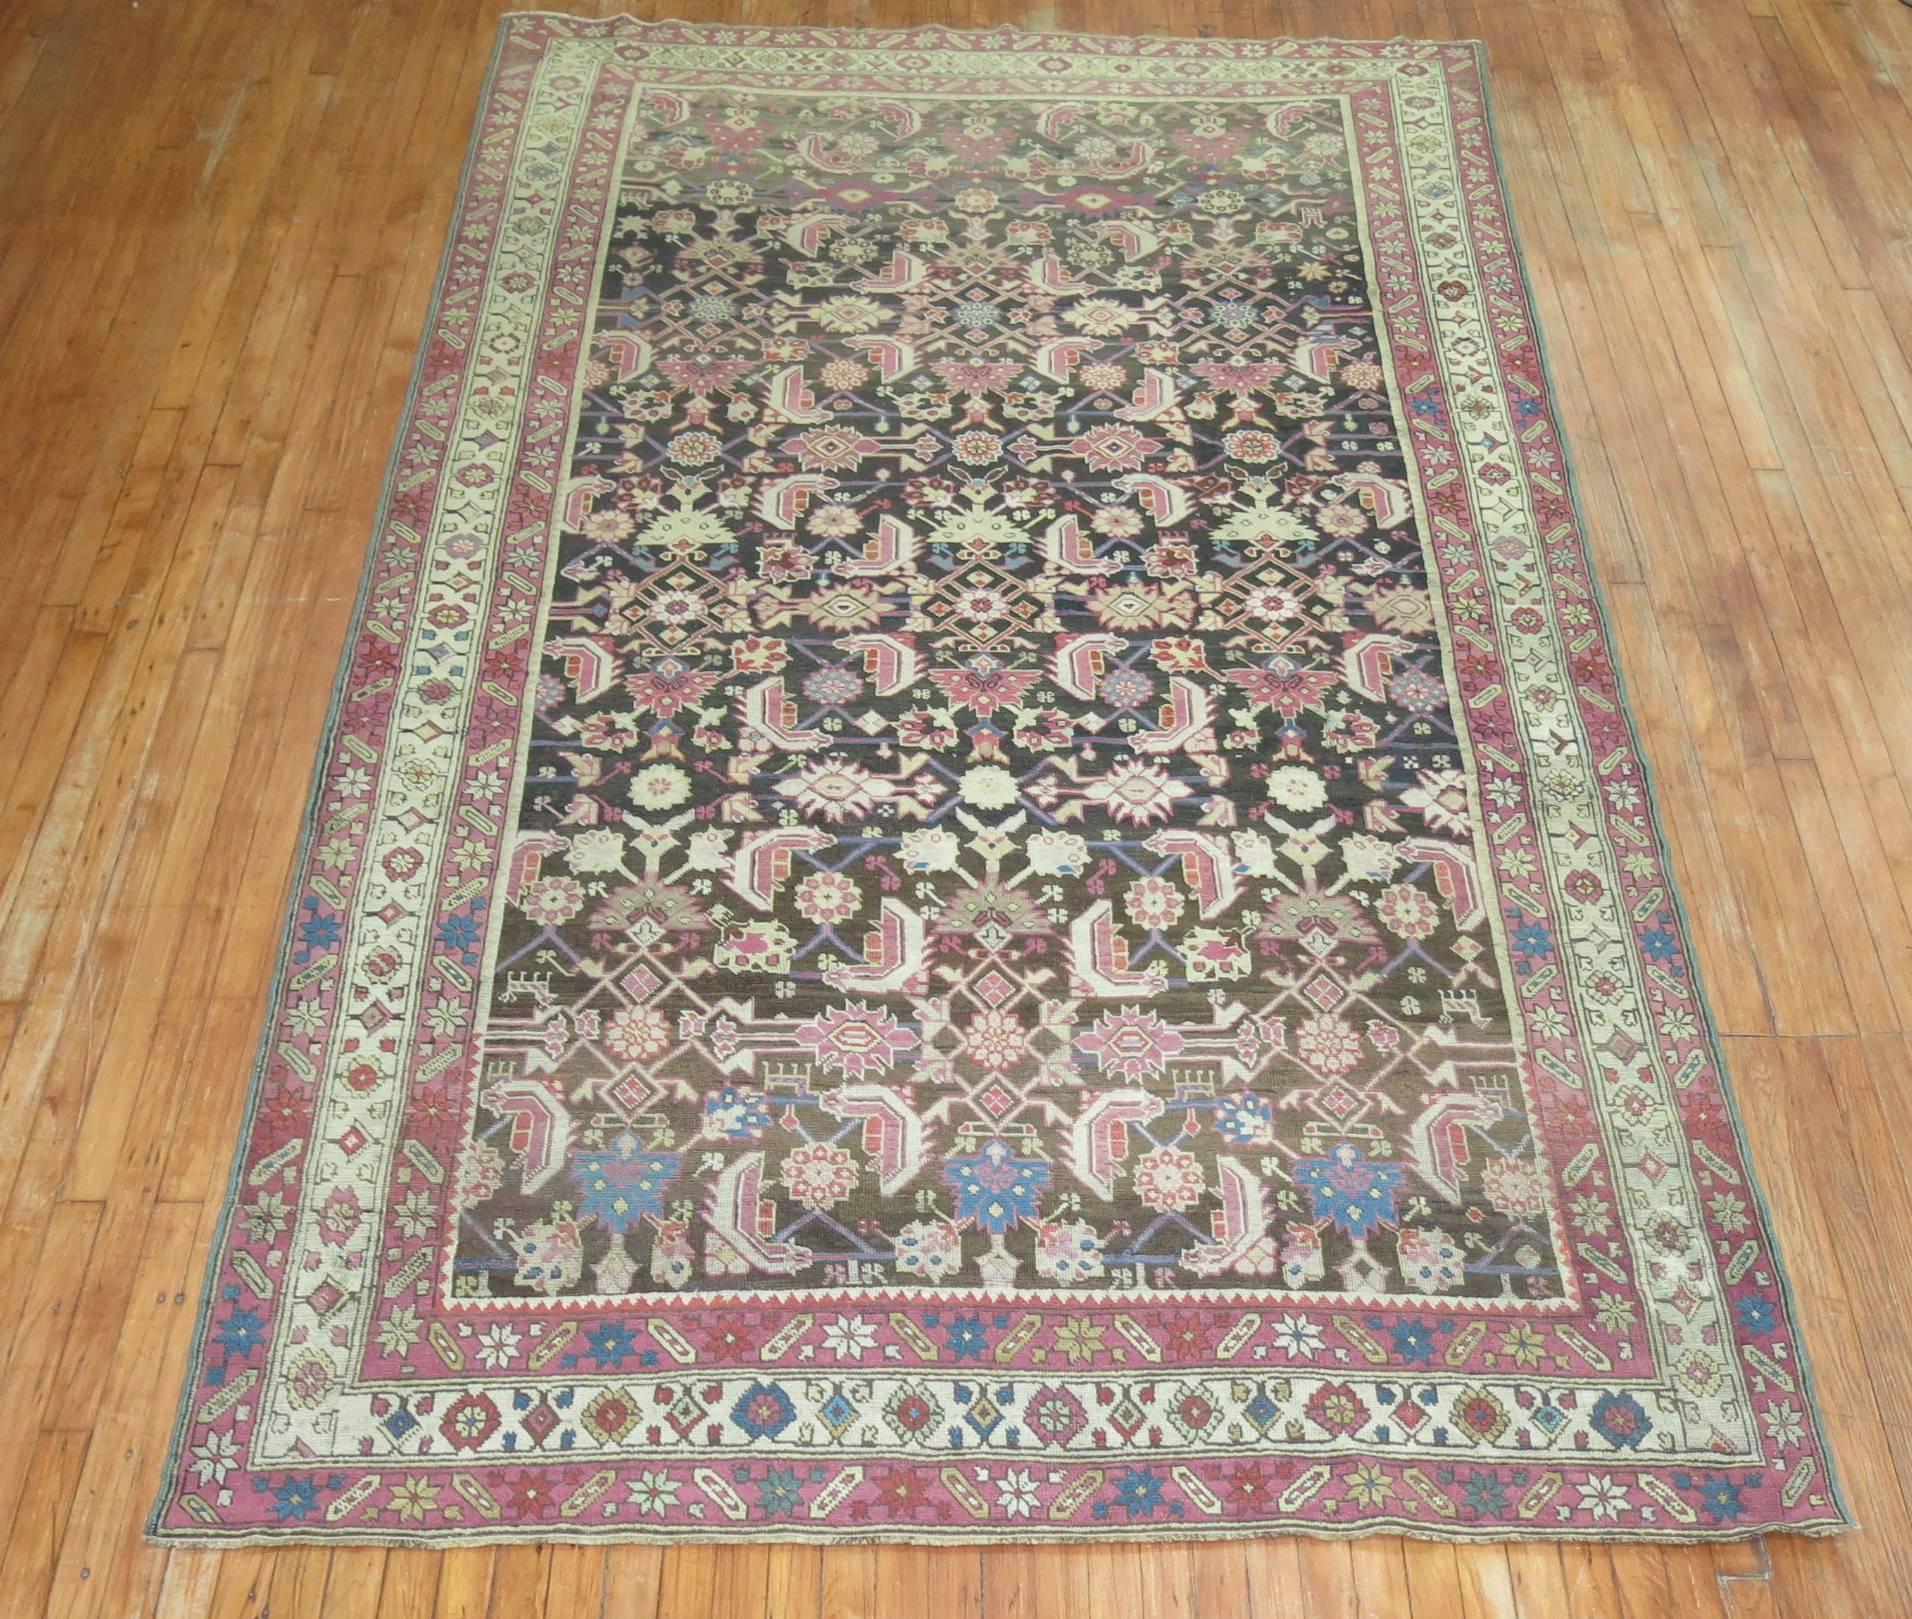 An attractive antique Karabagh rug. Herati pattern, chocolate brown colorfield with hints of lavender, chartreuse, pink and soft blues.

Measures: 6'2'' x 10'10'' circa 1920.

 